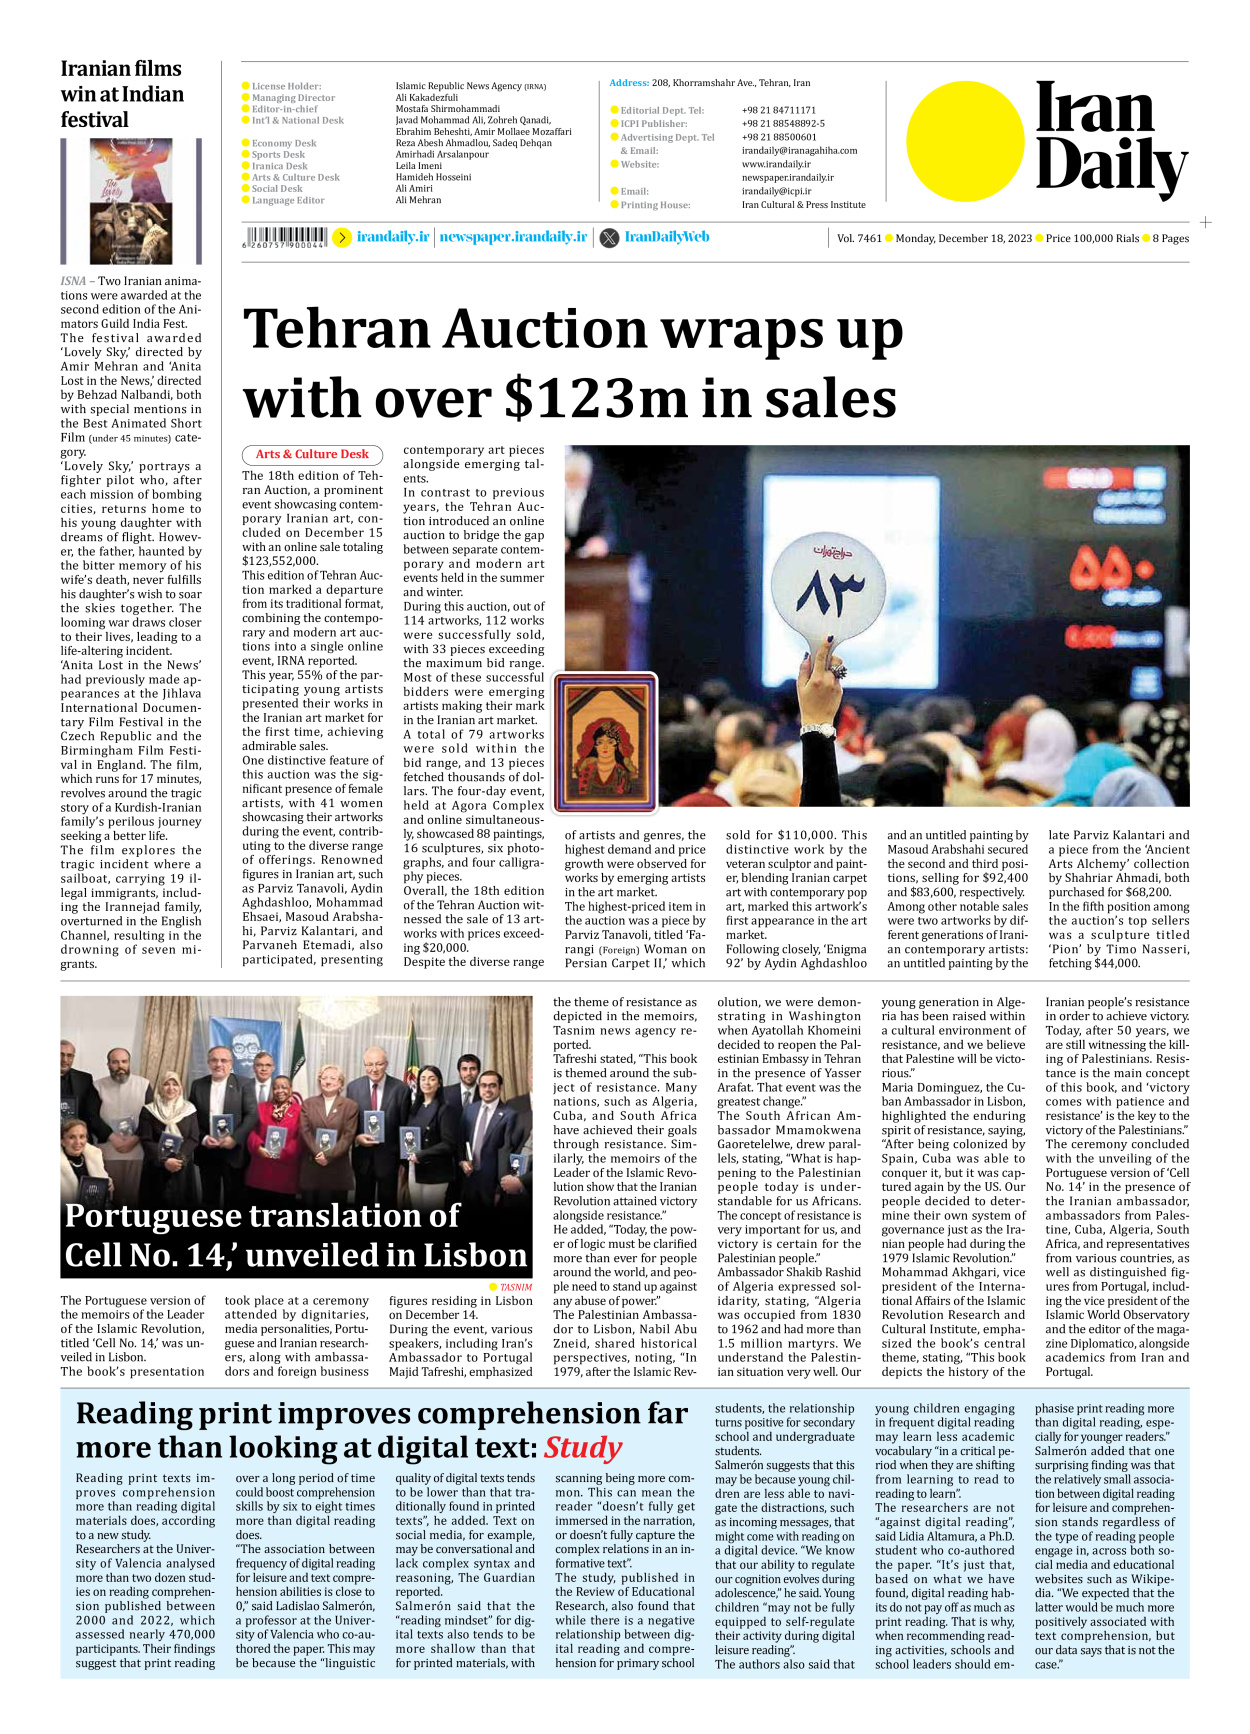 Iran Daily - Number Seven Thousand Four Hundred and Sixty One - 18 December 2023 - Page 8